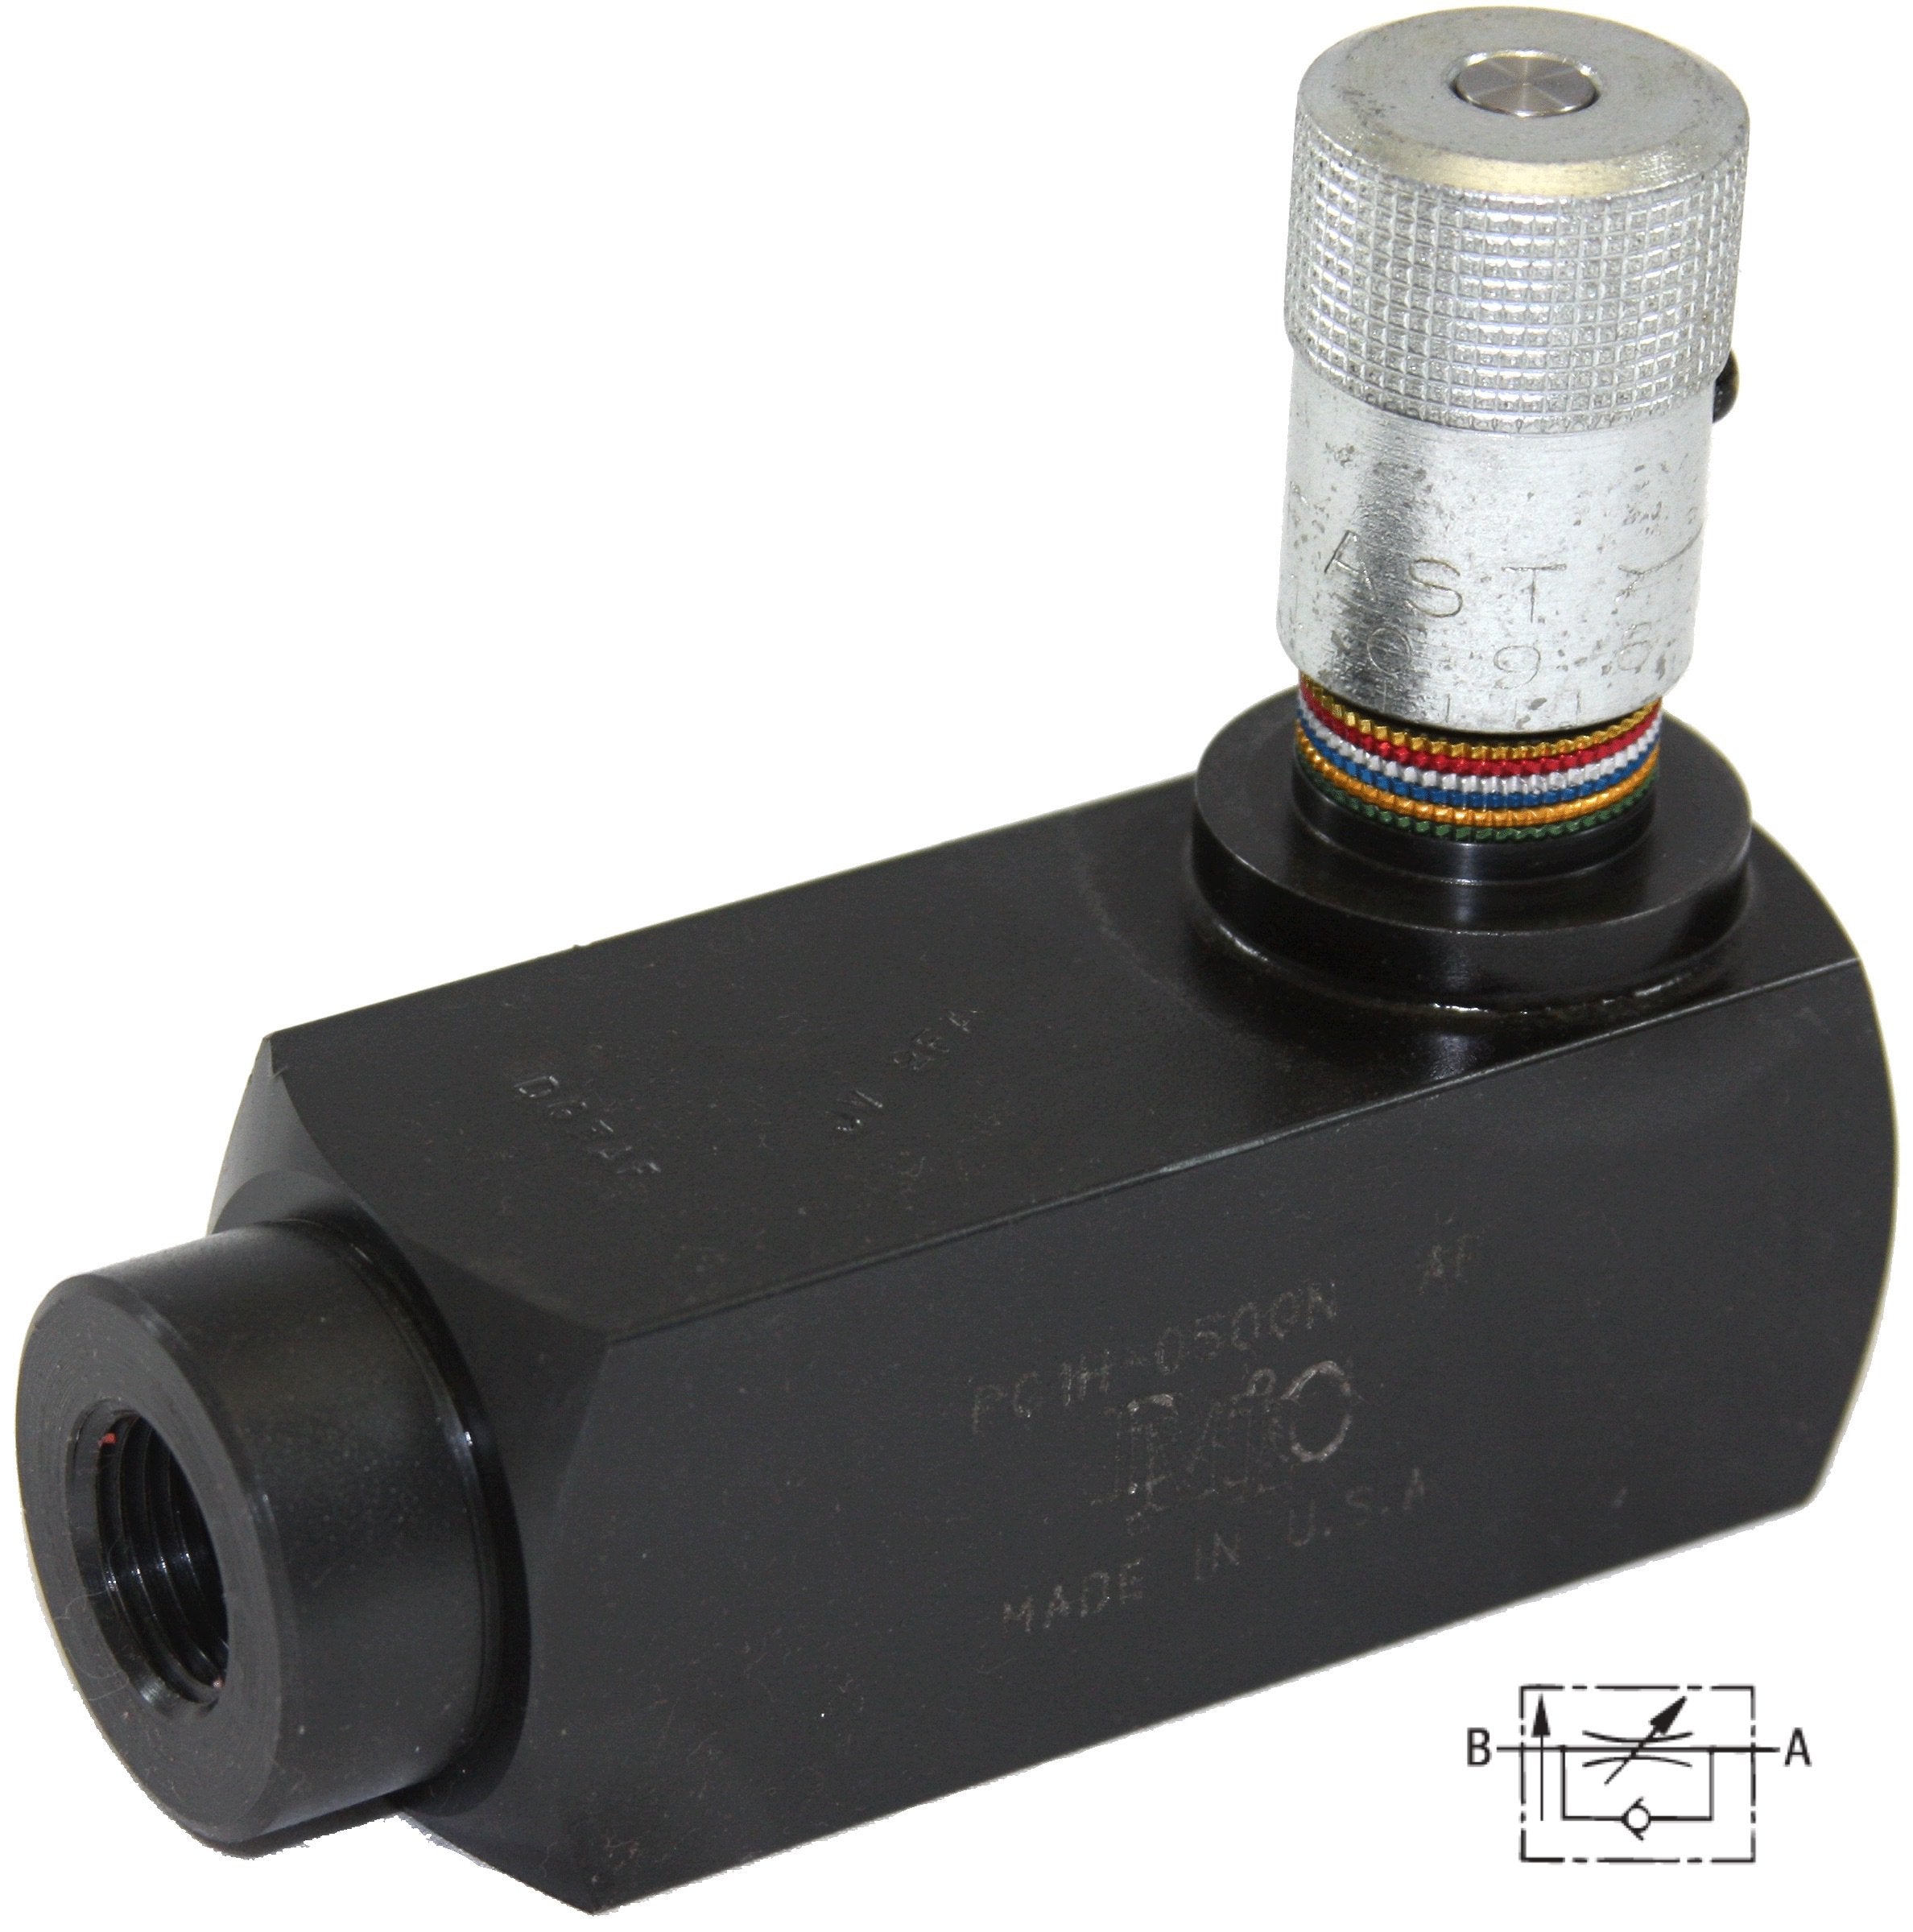 PC2H-0500S : DMIC Pressure Comp Flow Control, Metered Both Directions, #8 SAE (1/2"), 3000psi, Carbon Steel